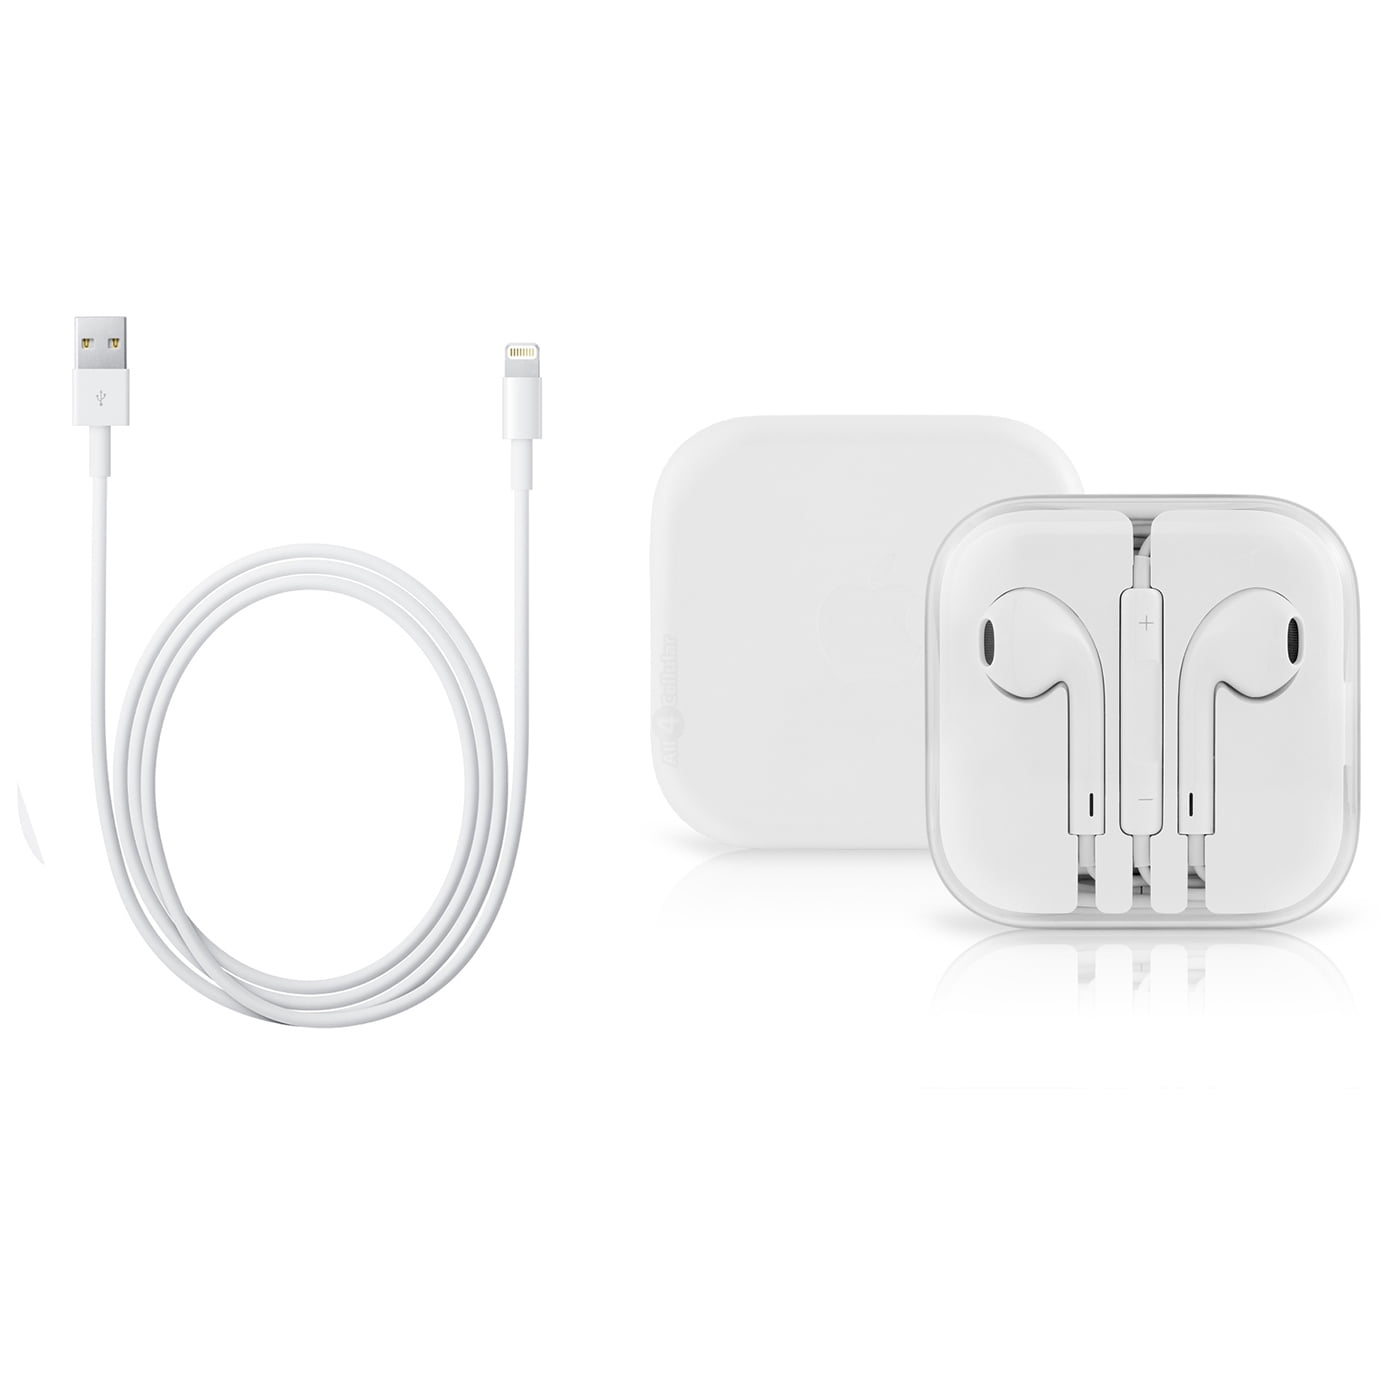 Airpods pro разъем. Apple Earpods with Lightning Connector. Зарядка Лайтинг для AIRPODS. AIRPODS Pro 1 зарядка. AIRPODS Pro разъем для зарядки.